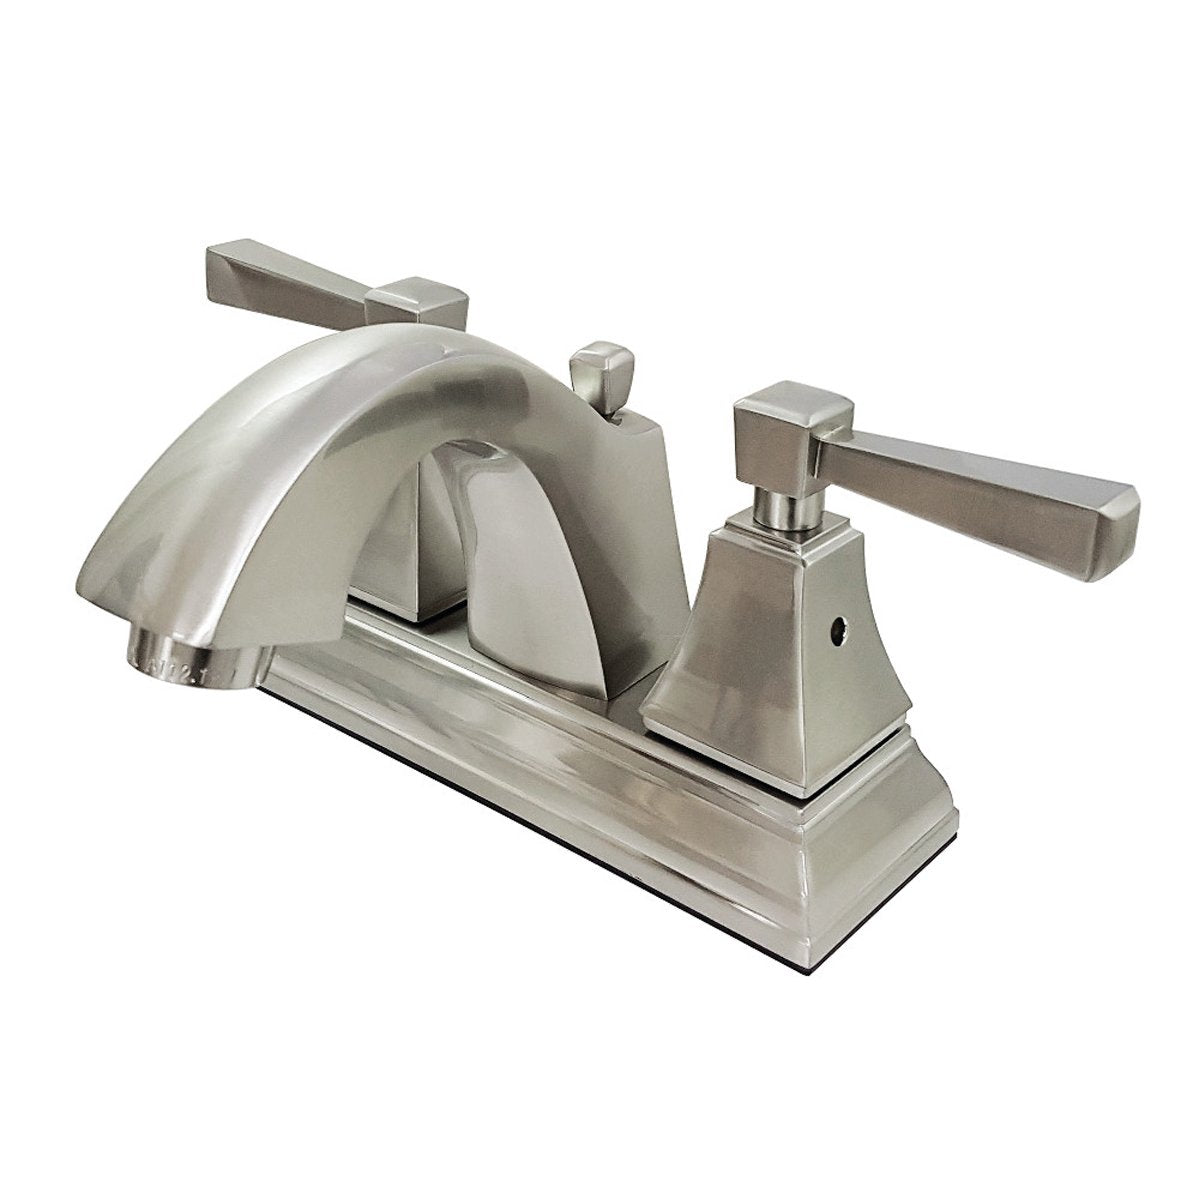 Kingston Brass Concord Fauceture 4-Inch Centerset Bathroom Faucet